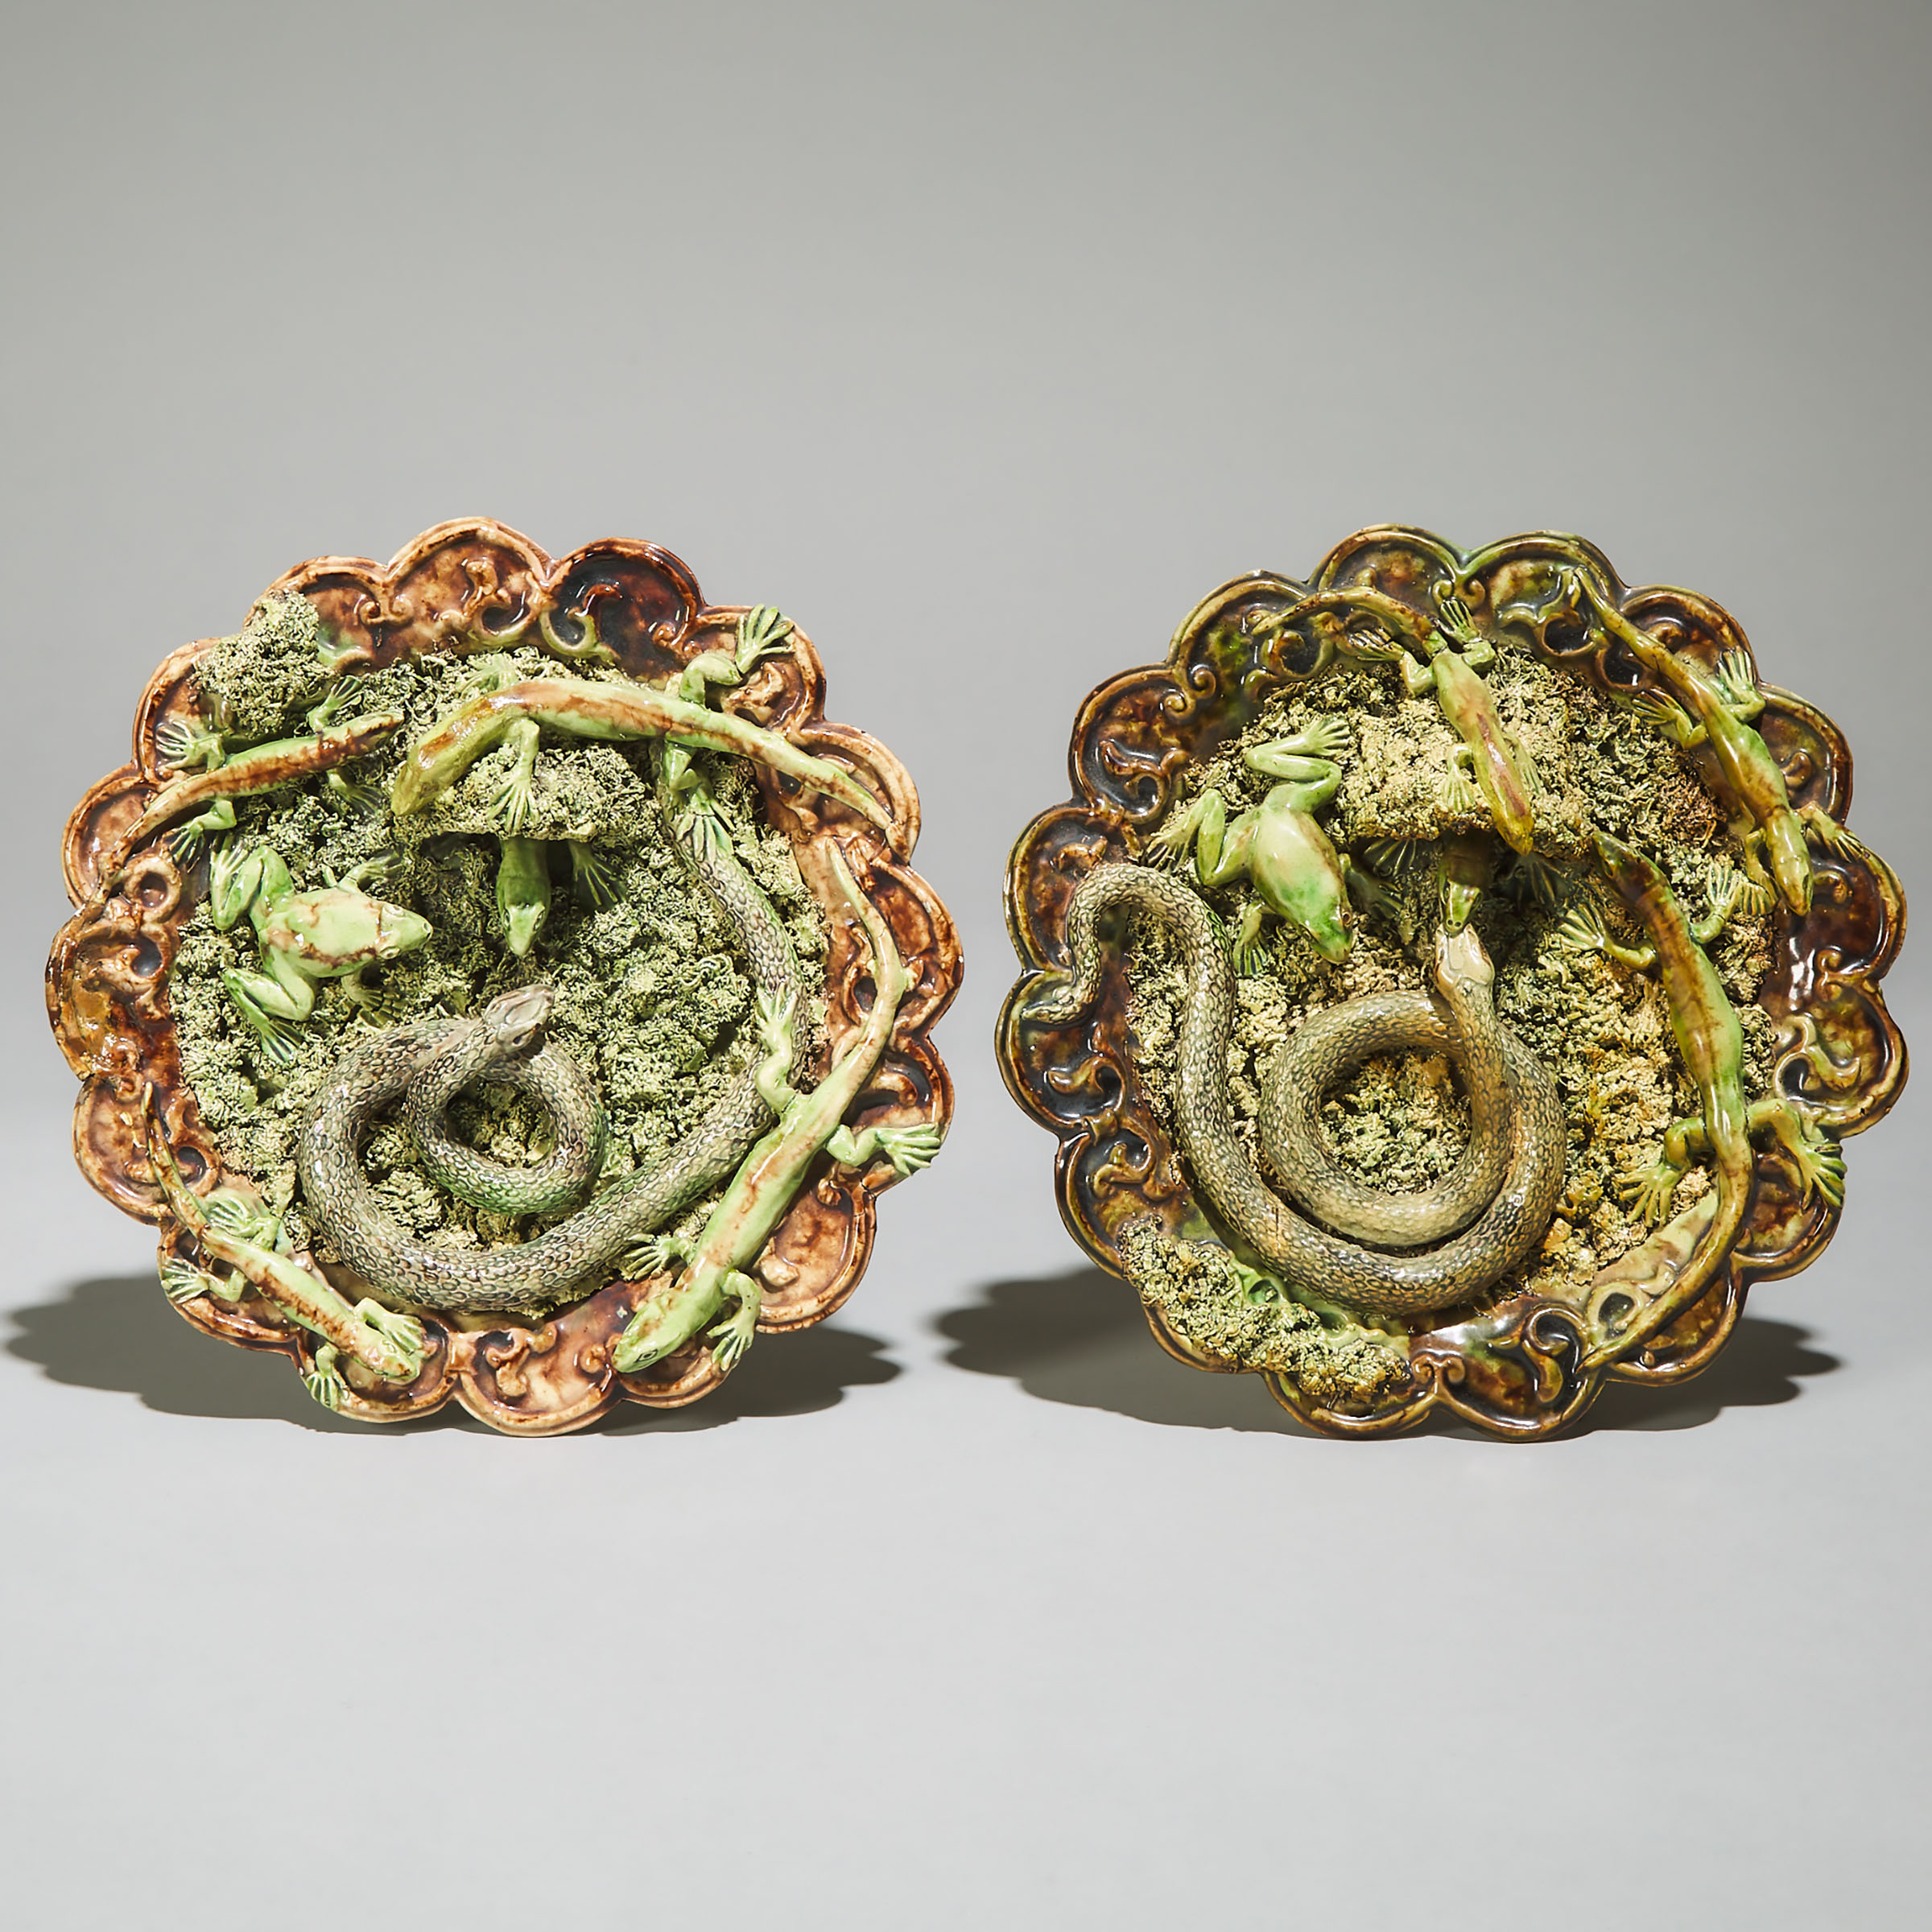 Pair of José Cunha Majolica Palissy-Style Circular Wall Plaques, late 19th century